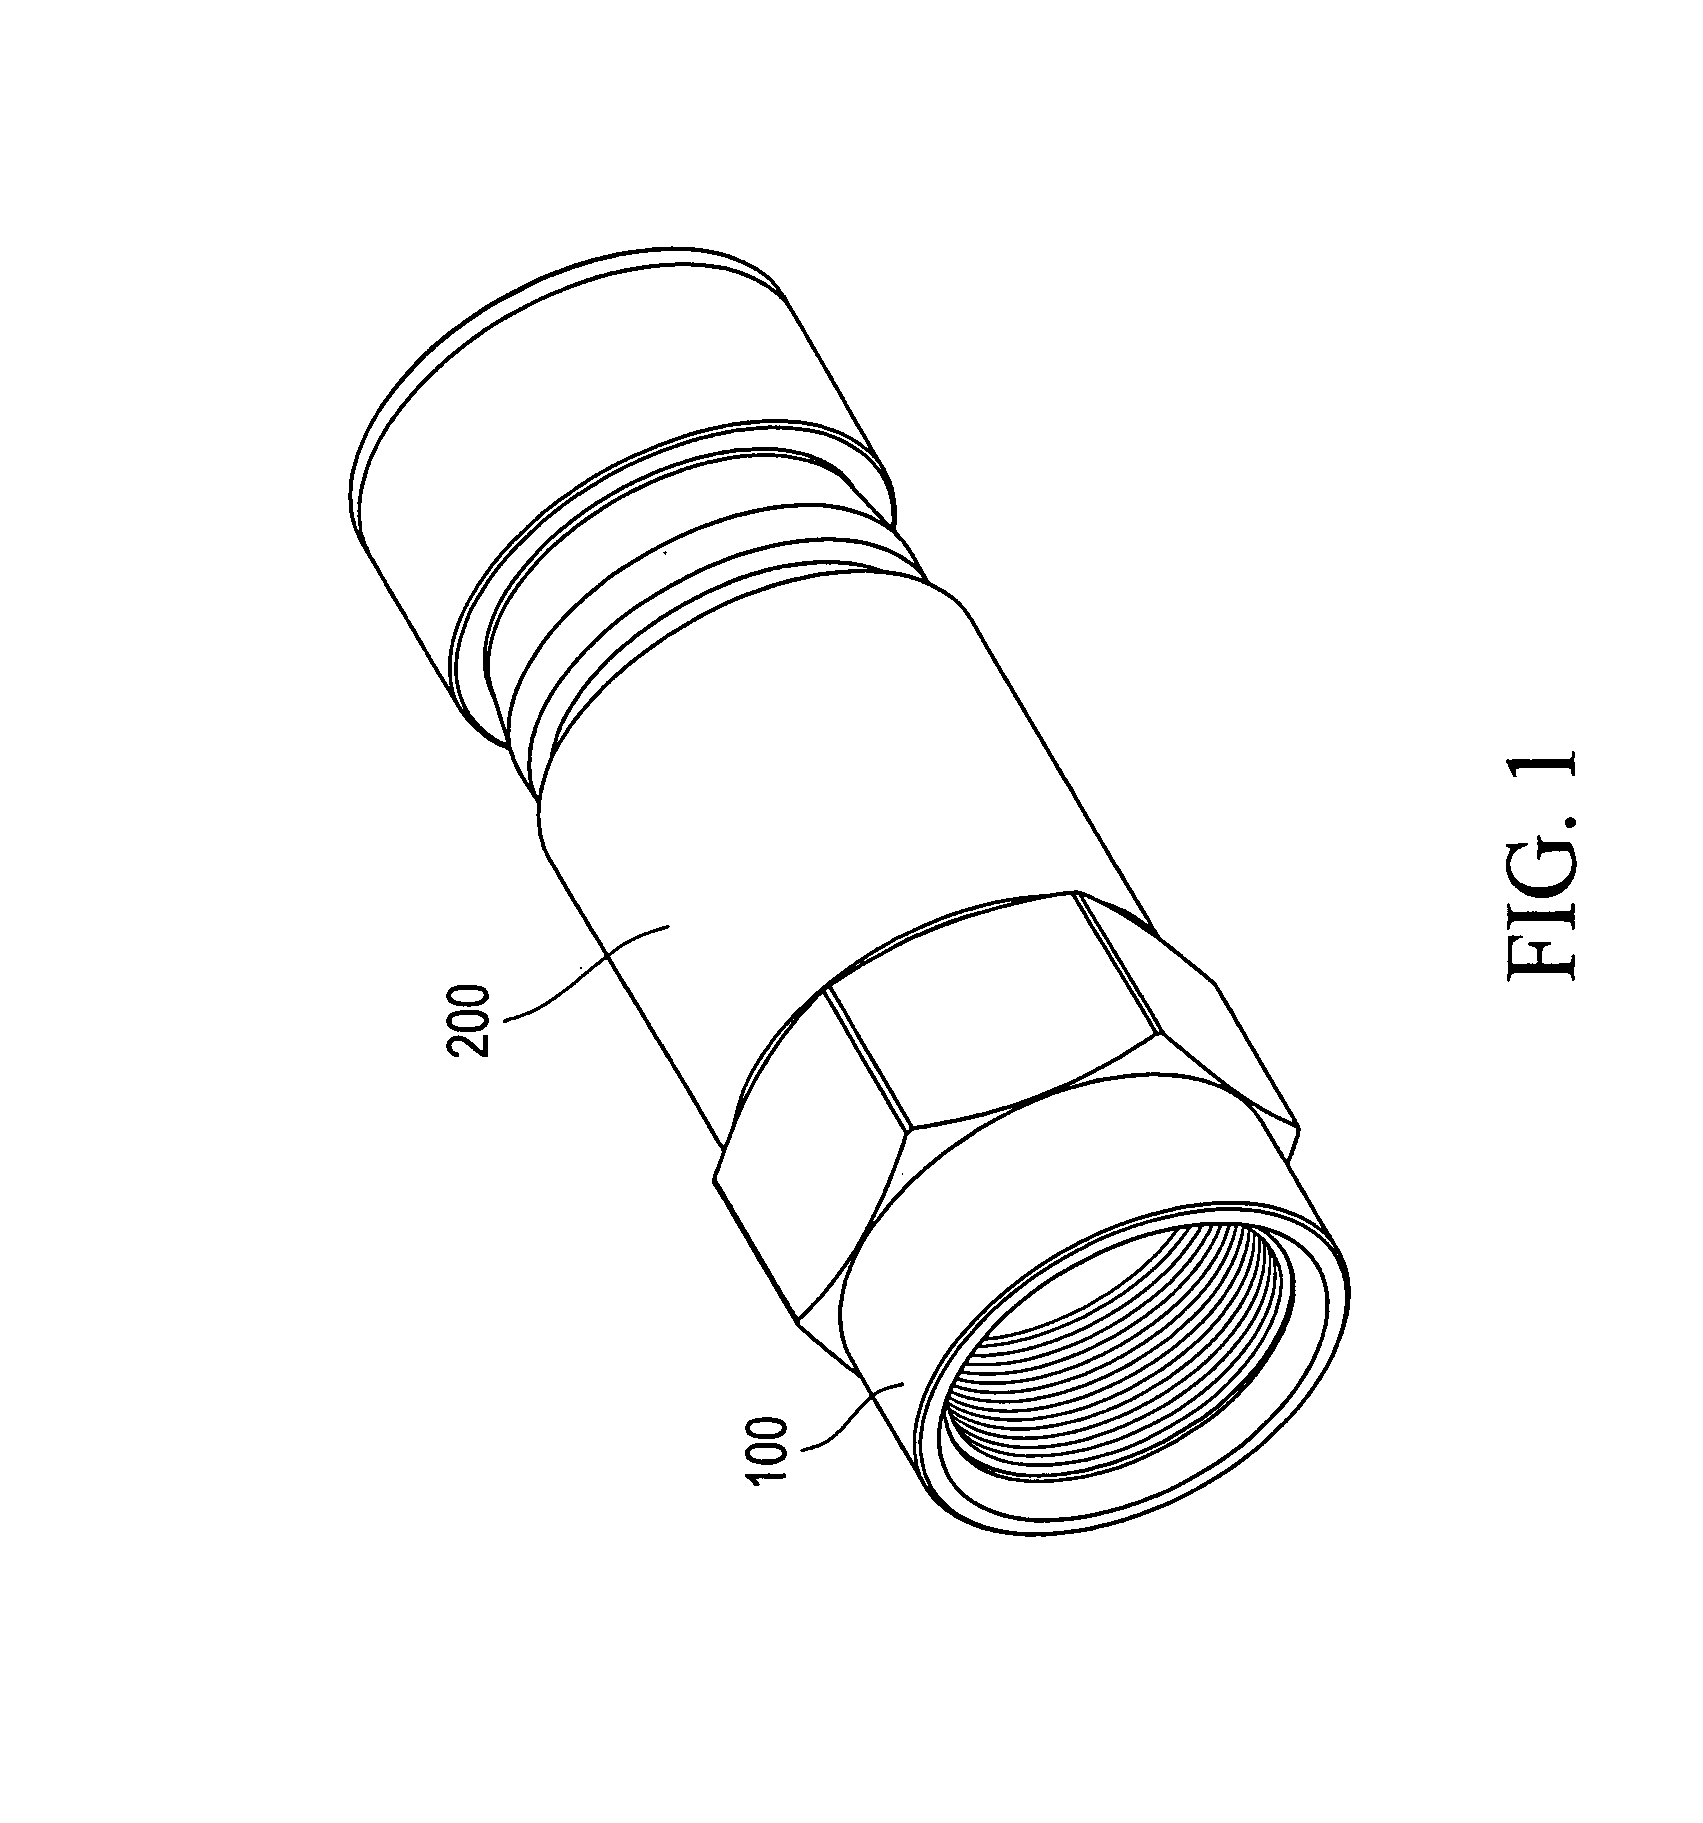 Coaxial cable connector enhancing tightness engagement with a coaxial cable